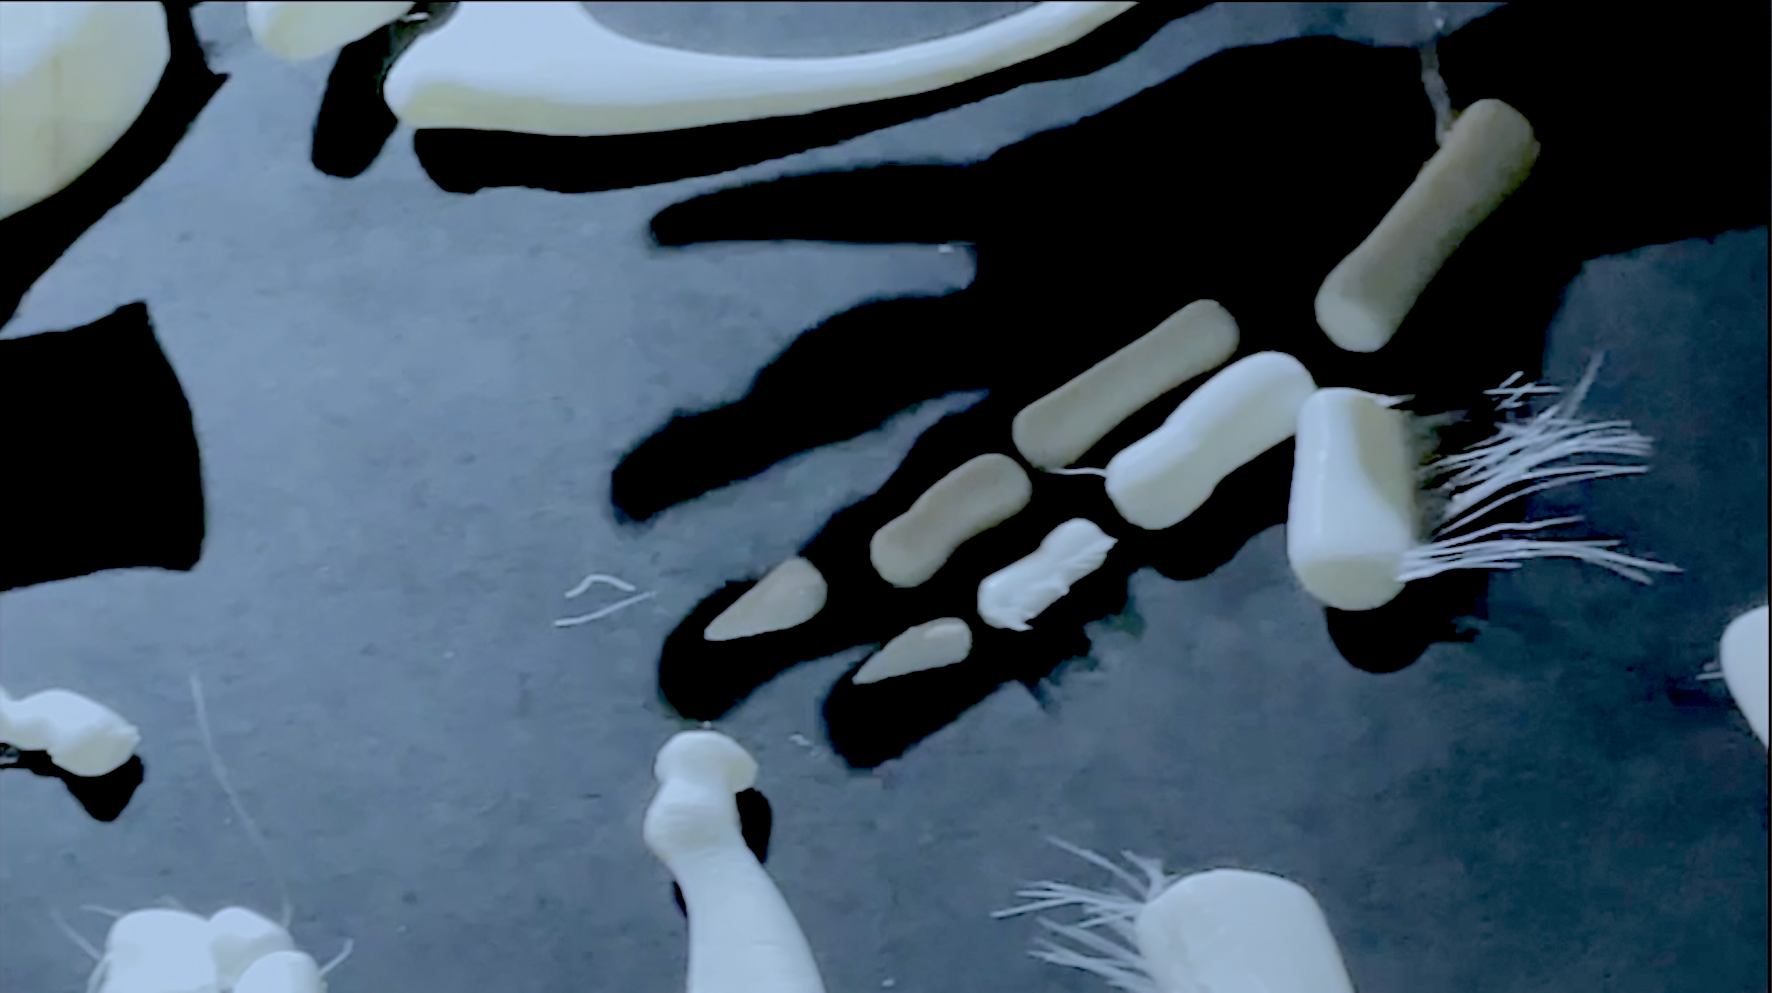 3-d printed bones lie on a grey-blue background, with an unseen hand hovering above and casting a shadow across the bones.